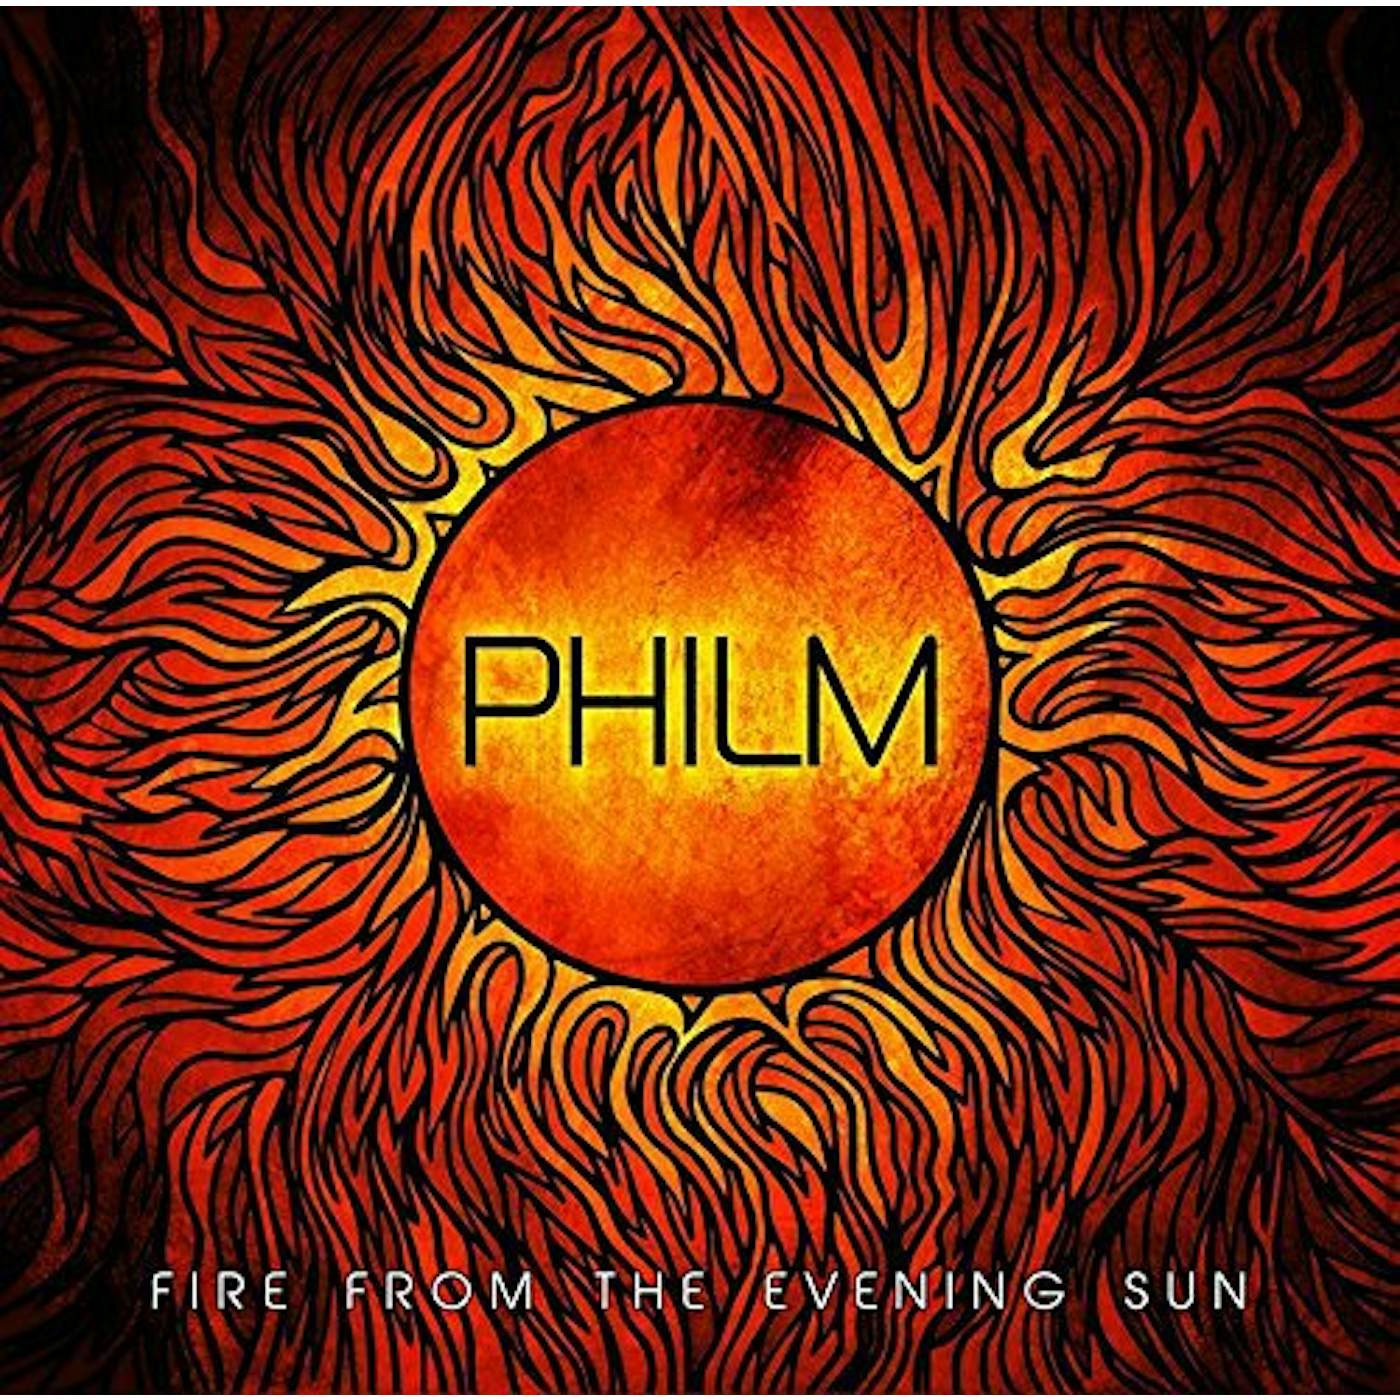 PHILM FIRE FROM THE EVENING SUN Vinyl Record